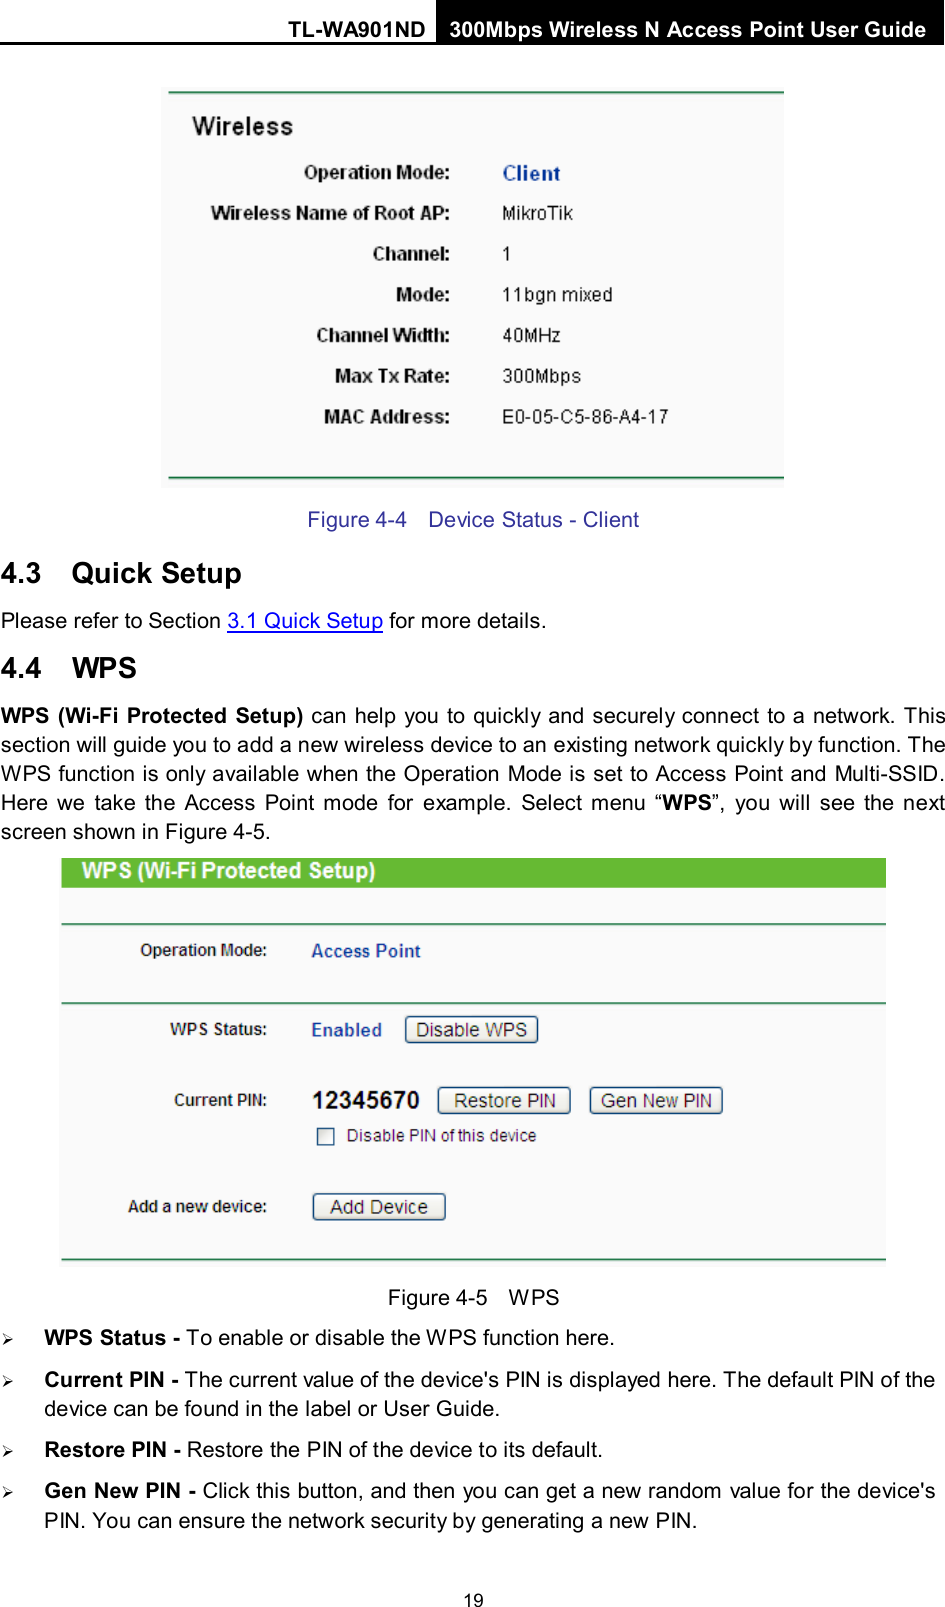 TL-WA901ND 300Mbps Wireless N Access Point User Guide  19  Figure 4-4  Device Status - Client 4.3 Quick Setup Please refer to Section 3.1 Quick Setup for more details. 4.4 WPS WPS (Wi-Fi Protected Setup) can help you to quickly and securely connect to a network. This section will guide you to add a new wireless device to an existing network quickly by function. The WPS function is only available when the Operation Mode is set to Access Point and Multi-SSID. Here we take the Access Point mode for example. Select menu  “WPS”, you will see the next screen shown in Figure 4-5.    Figure 4-5  W PS  WPS Status - To enable or disable the WPS function here.    Current PIN - The current value of the device&apos;s PIN is displayed here. The default PIN of the device can be found in the label or User Guide.    Restore PIN - Restore the PIN of the device to its default.    Gen New PIN - Click this button, and then you can get a new random value for the device&apos;s PIN. You can ensure the network security by generating a new PIN.   